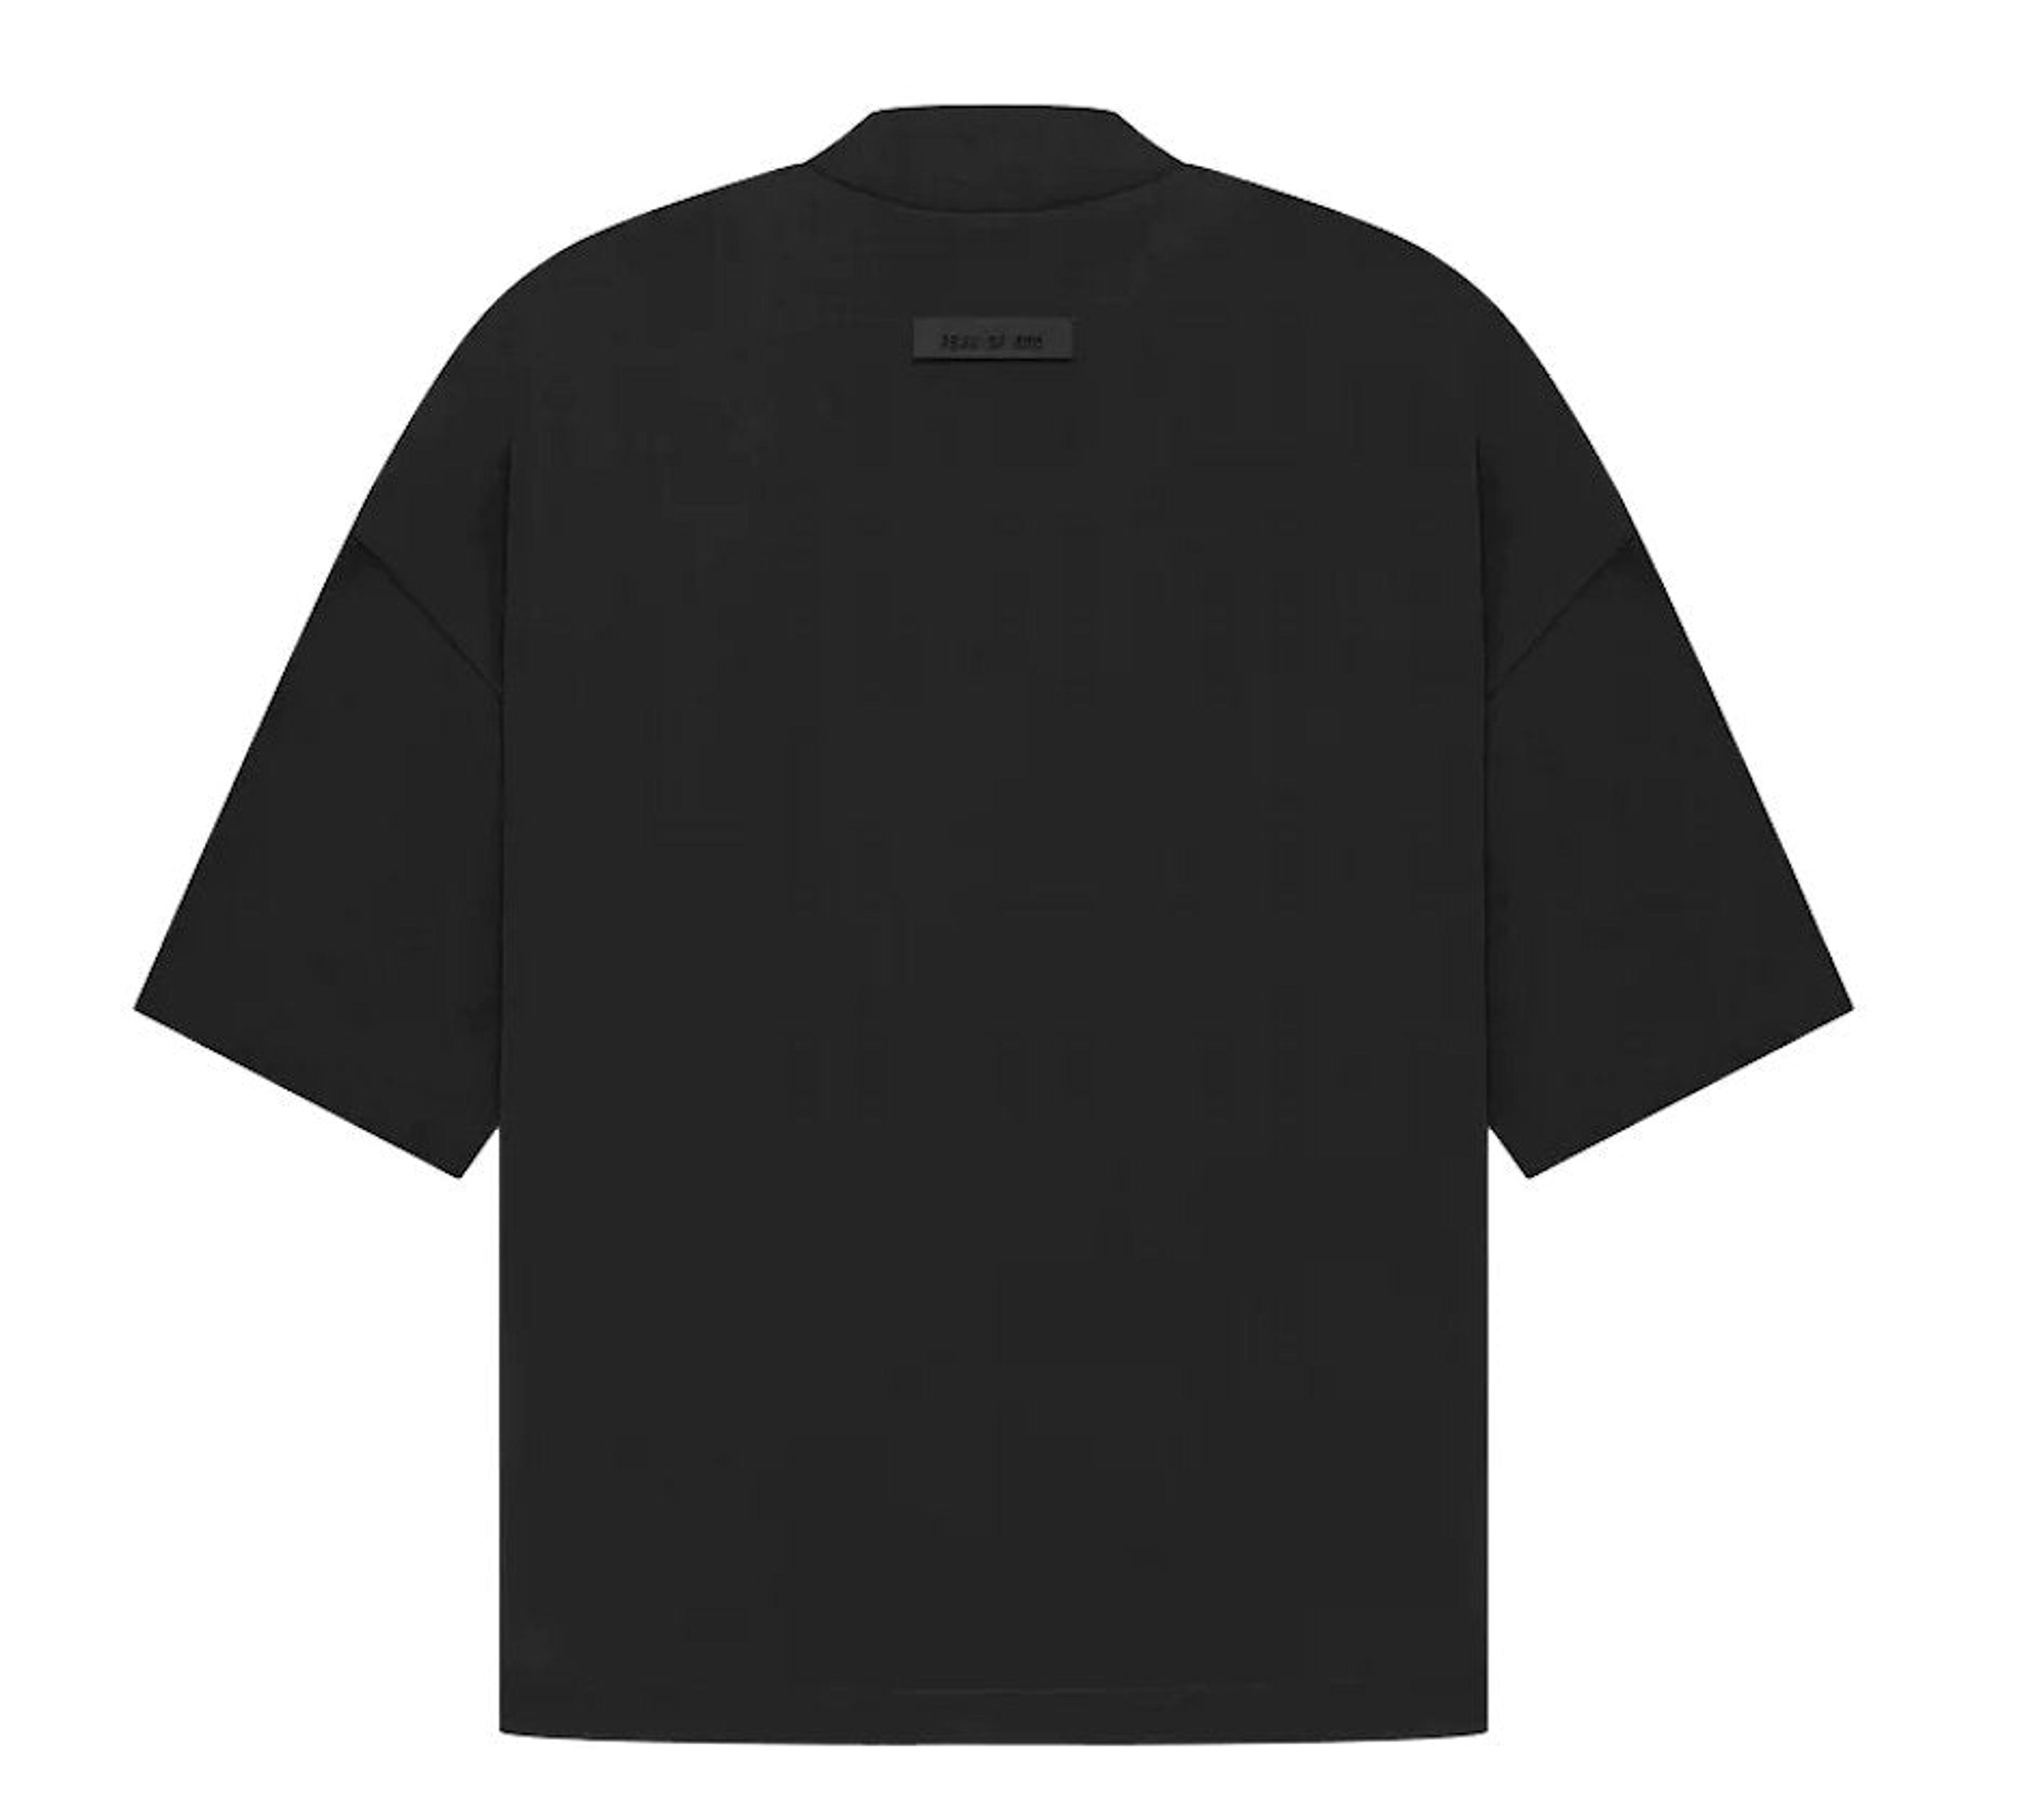 Alternate View 1 of Fear of God Essentials Tee Black Collection